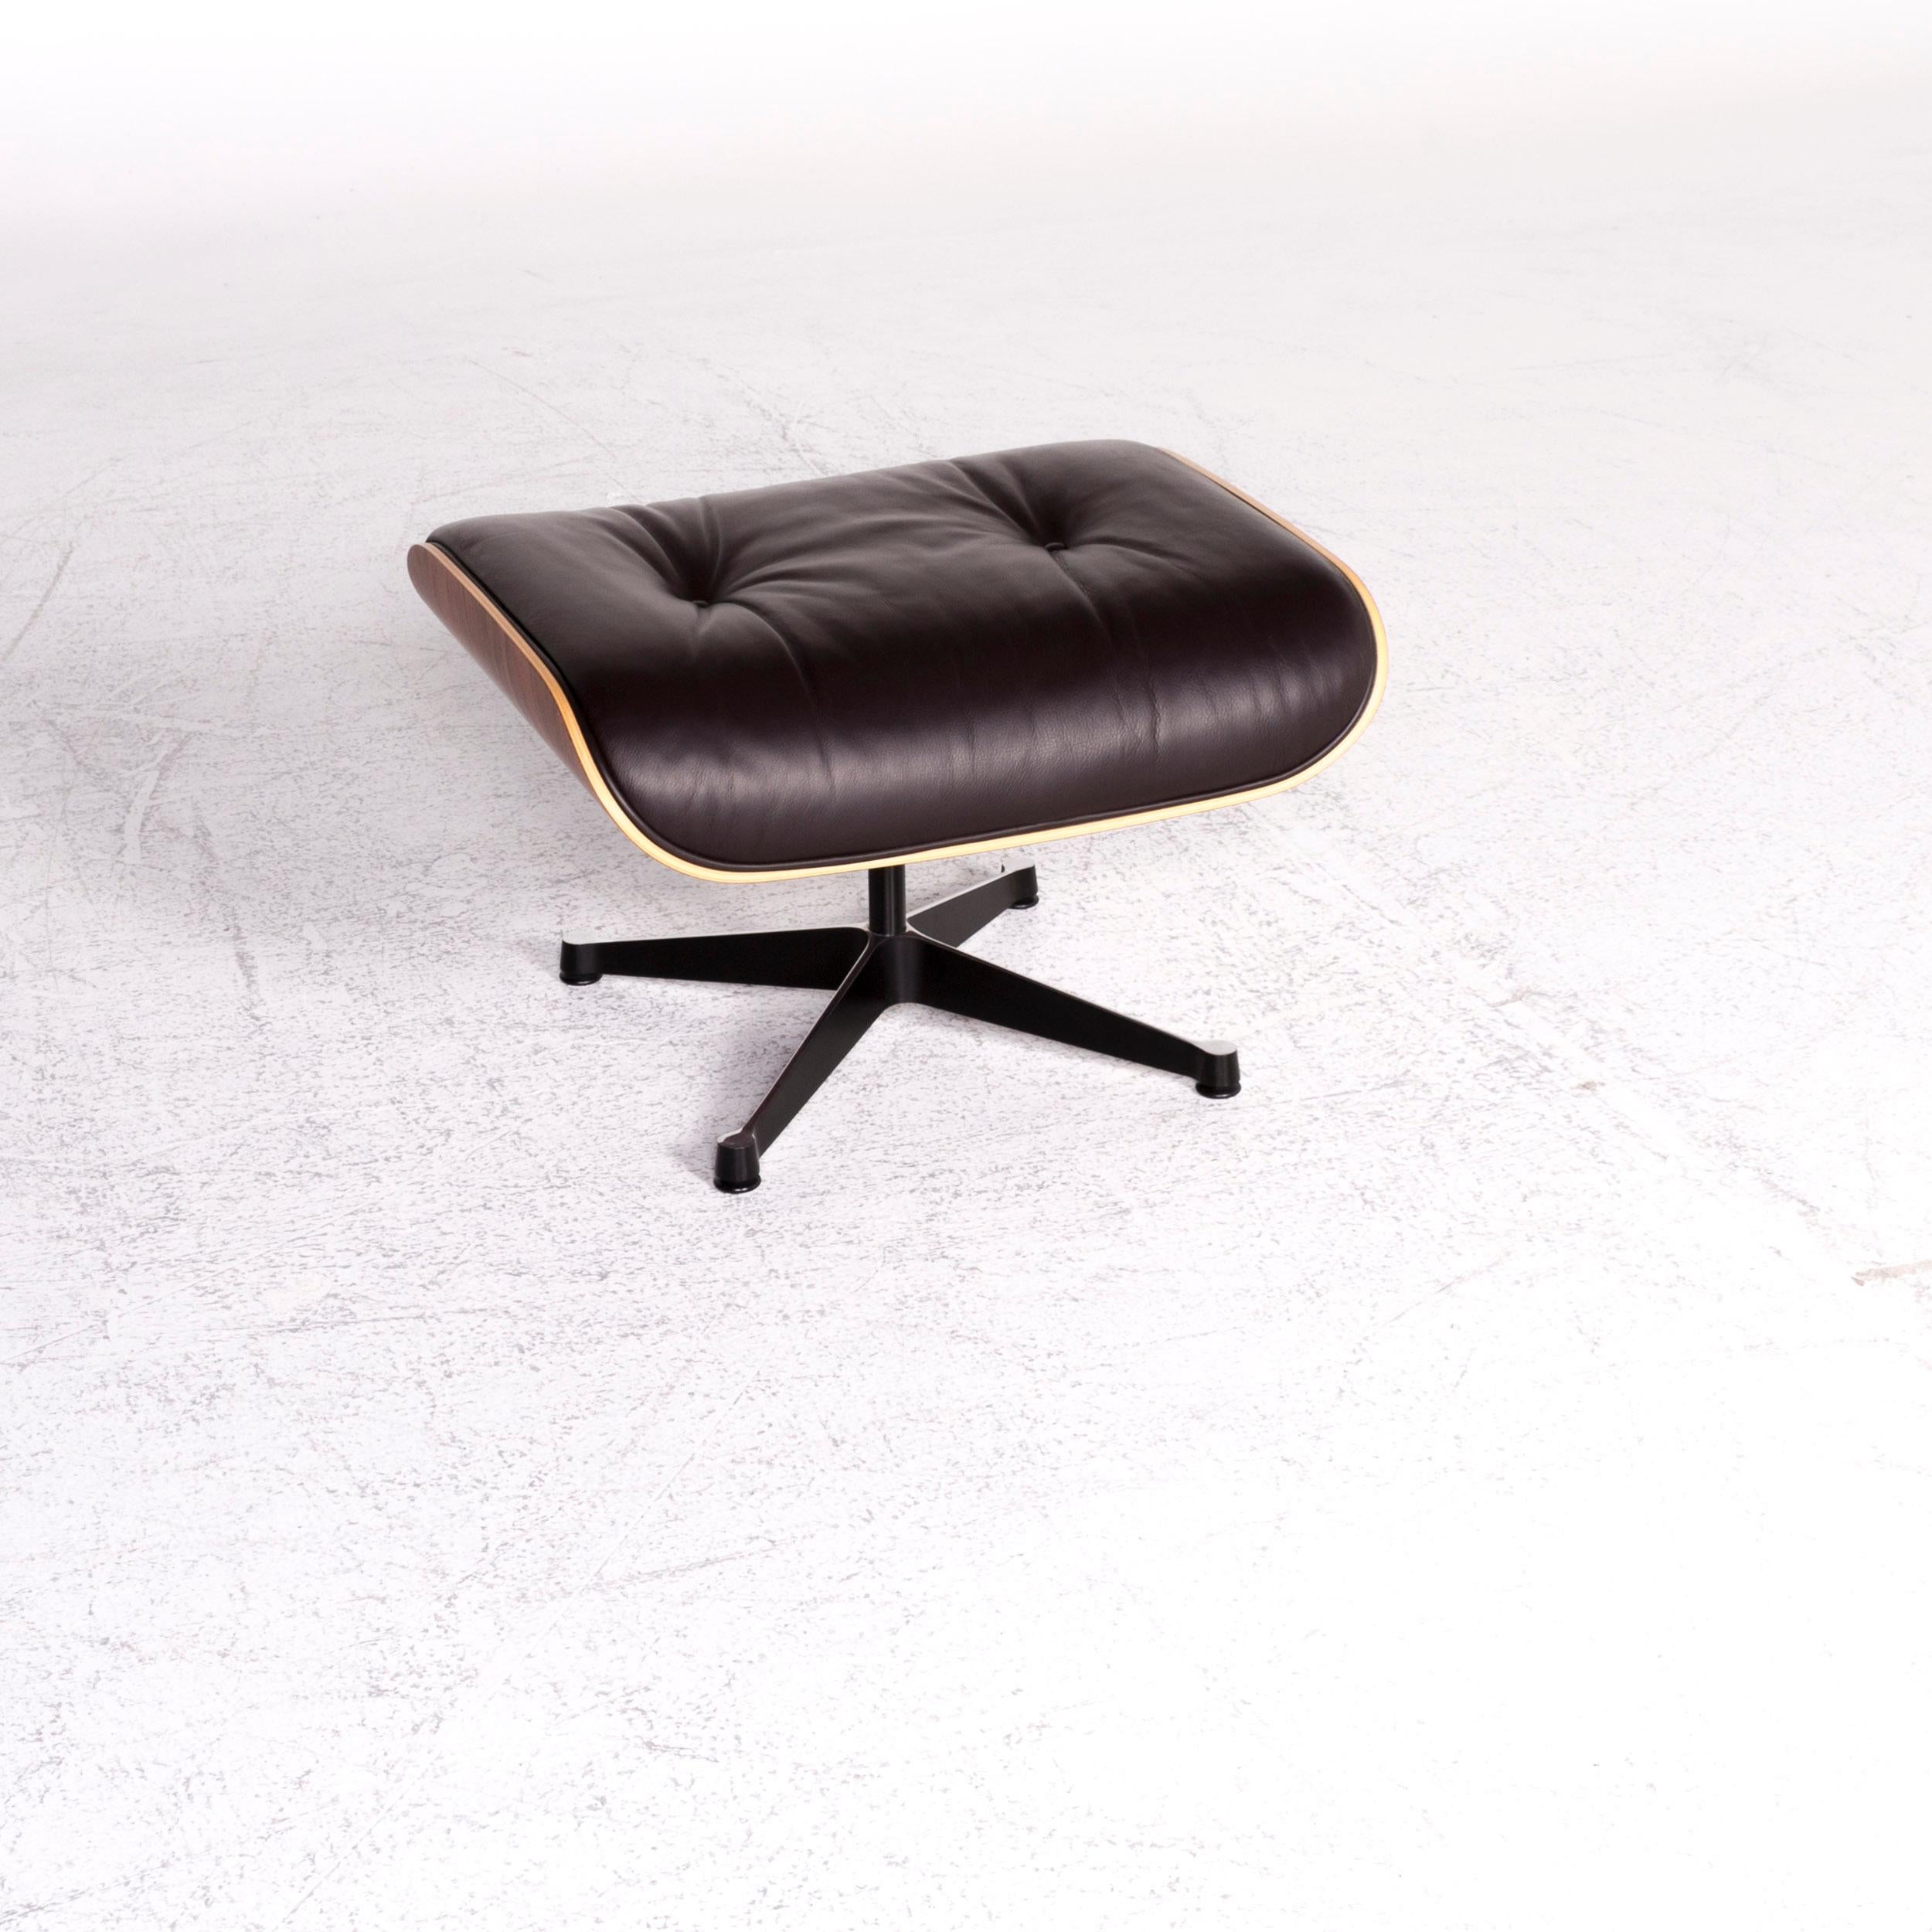 Modern Vitra Eames Lounge Chair Leather Stool Brown Charles & Ray Eames Chair For Sale